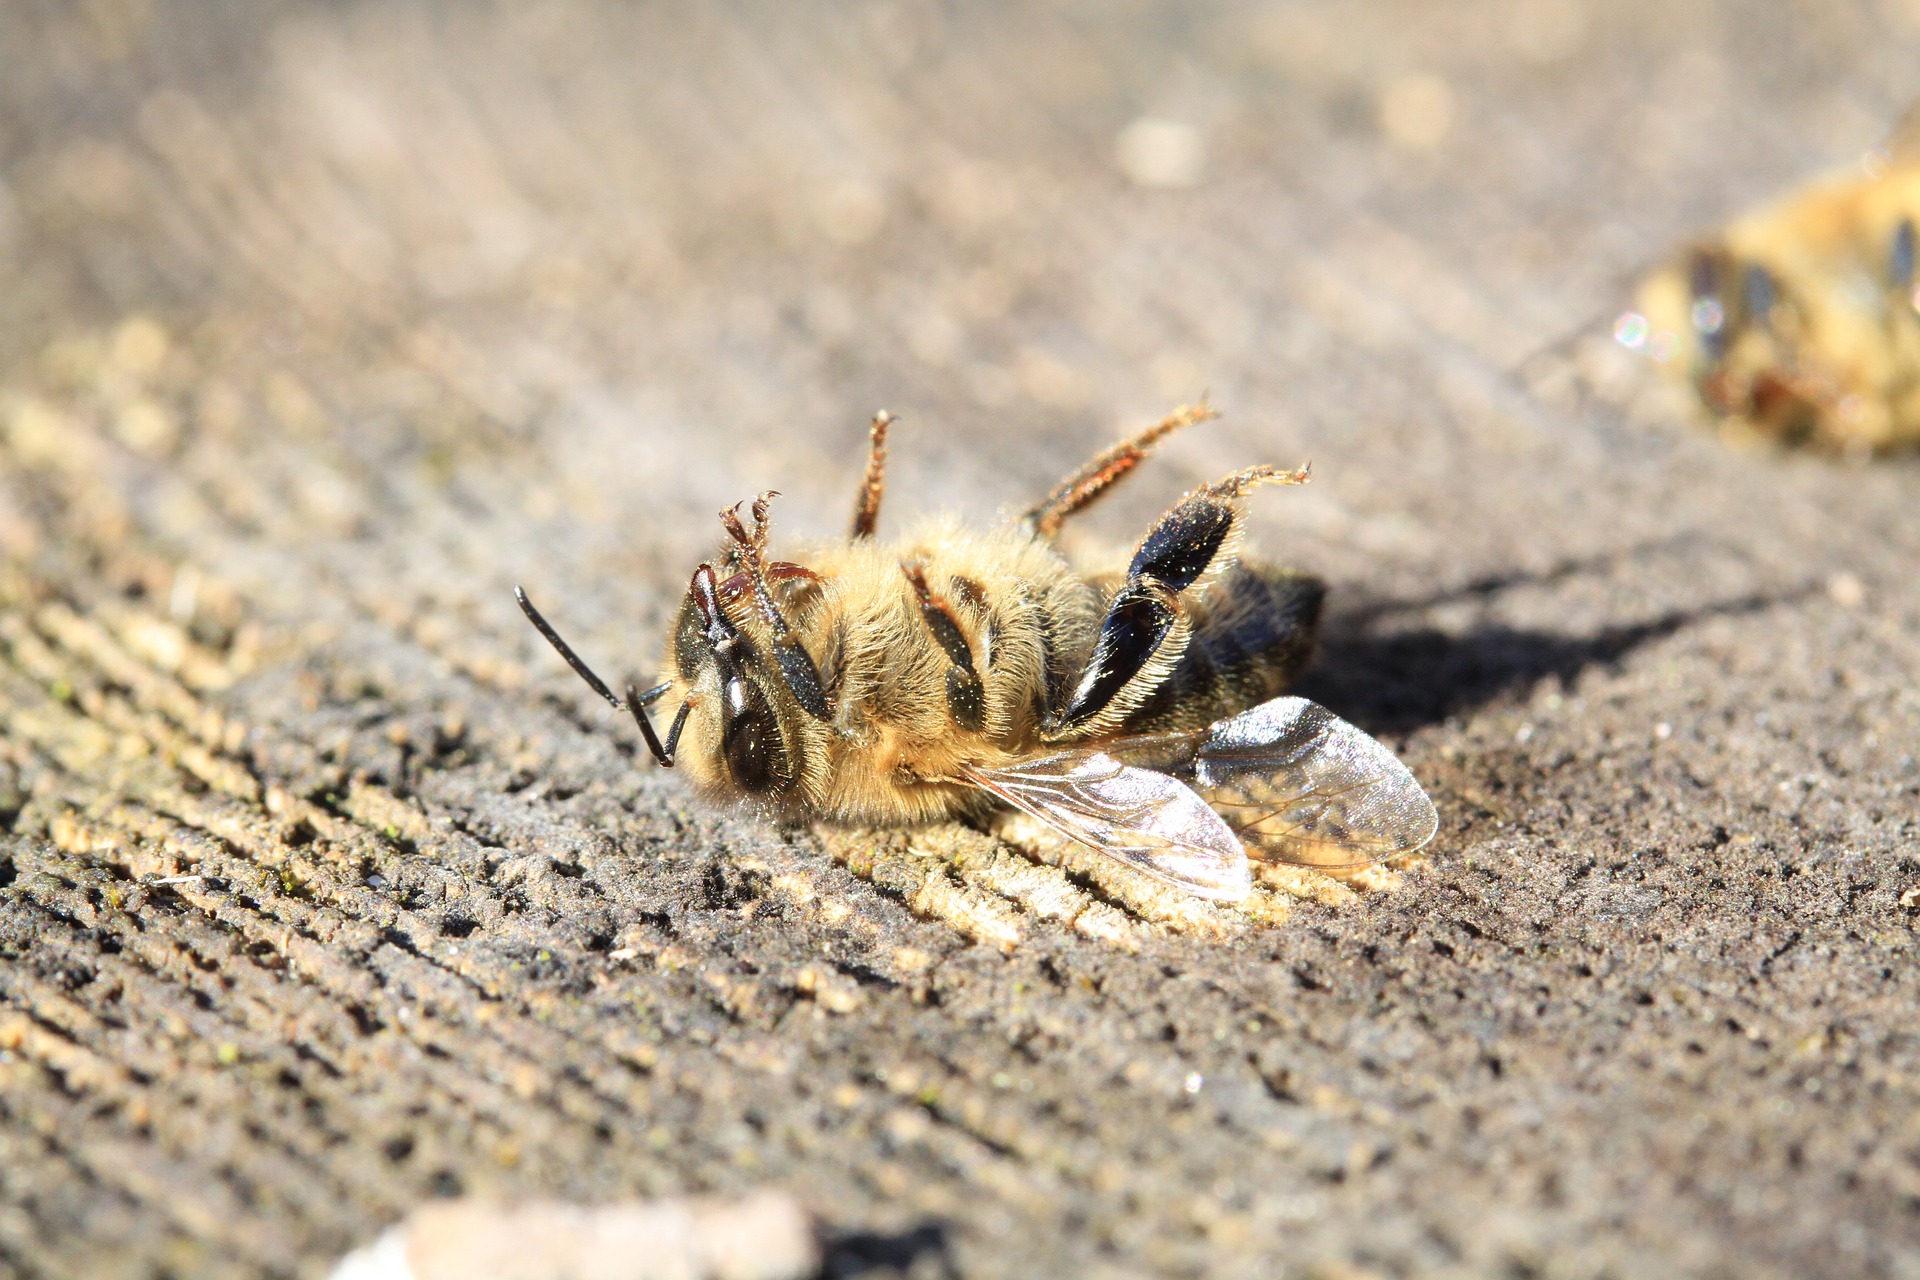  How bee harming pesticides found in honey affect beekeeping. Some of these chemicals have been shown to cause serious harm to the bees. They are now found in honey.